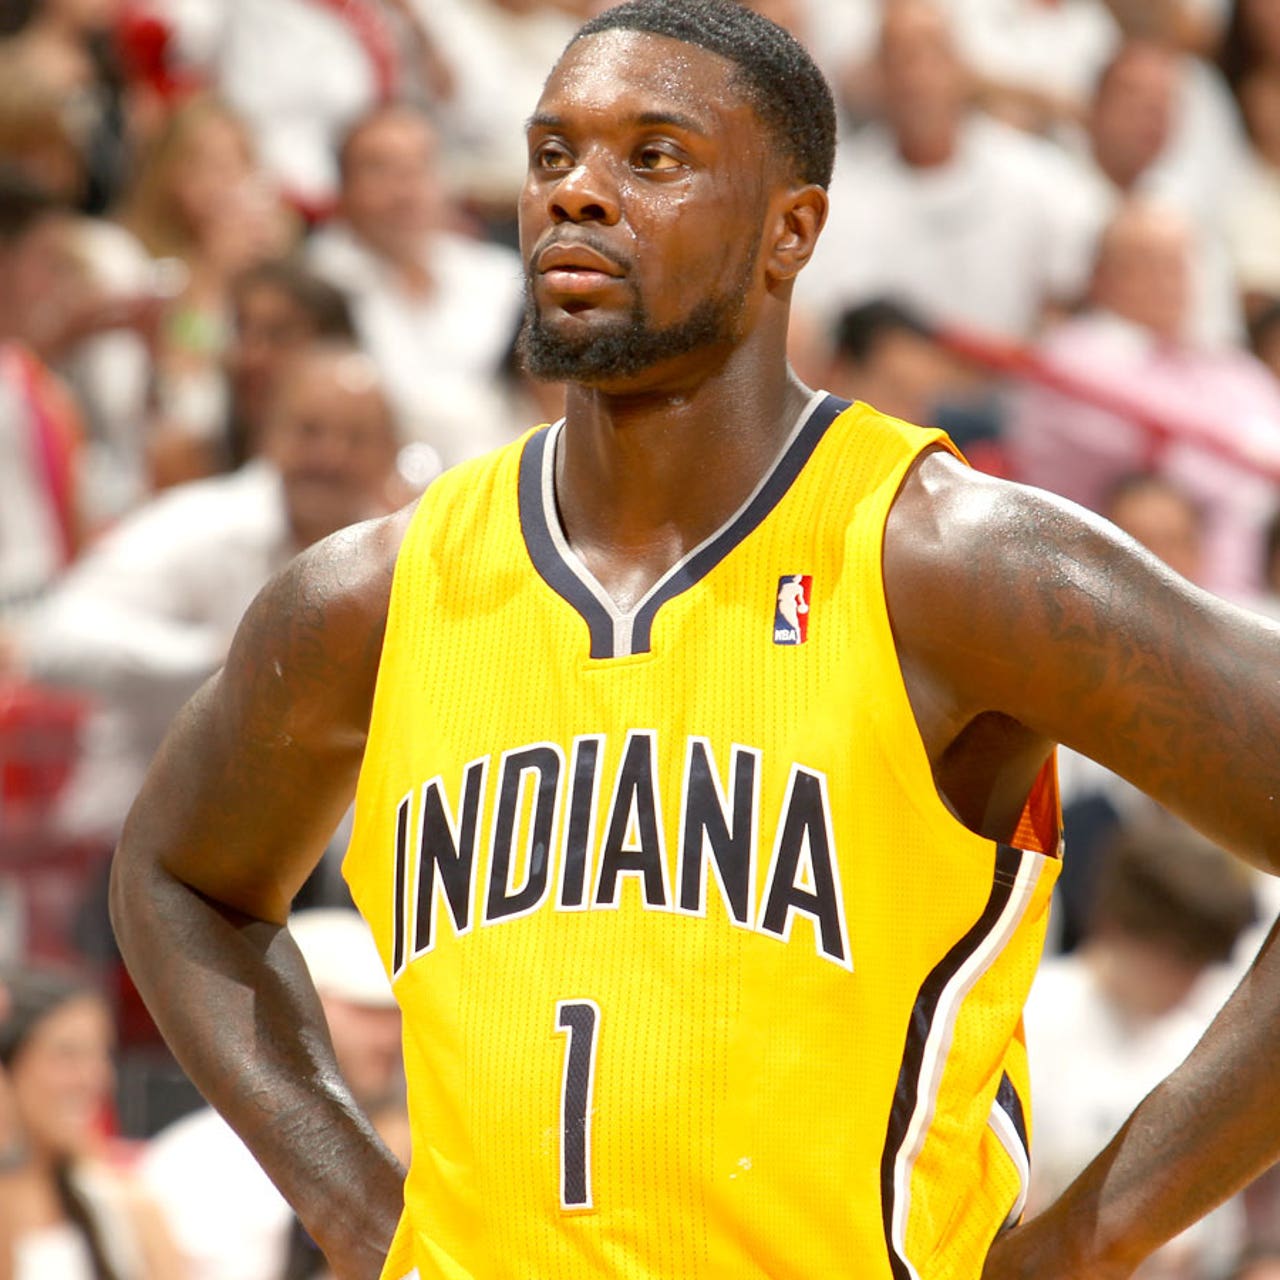 Lance Stephenson wants NBA return to be with Knicks or Nets